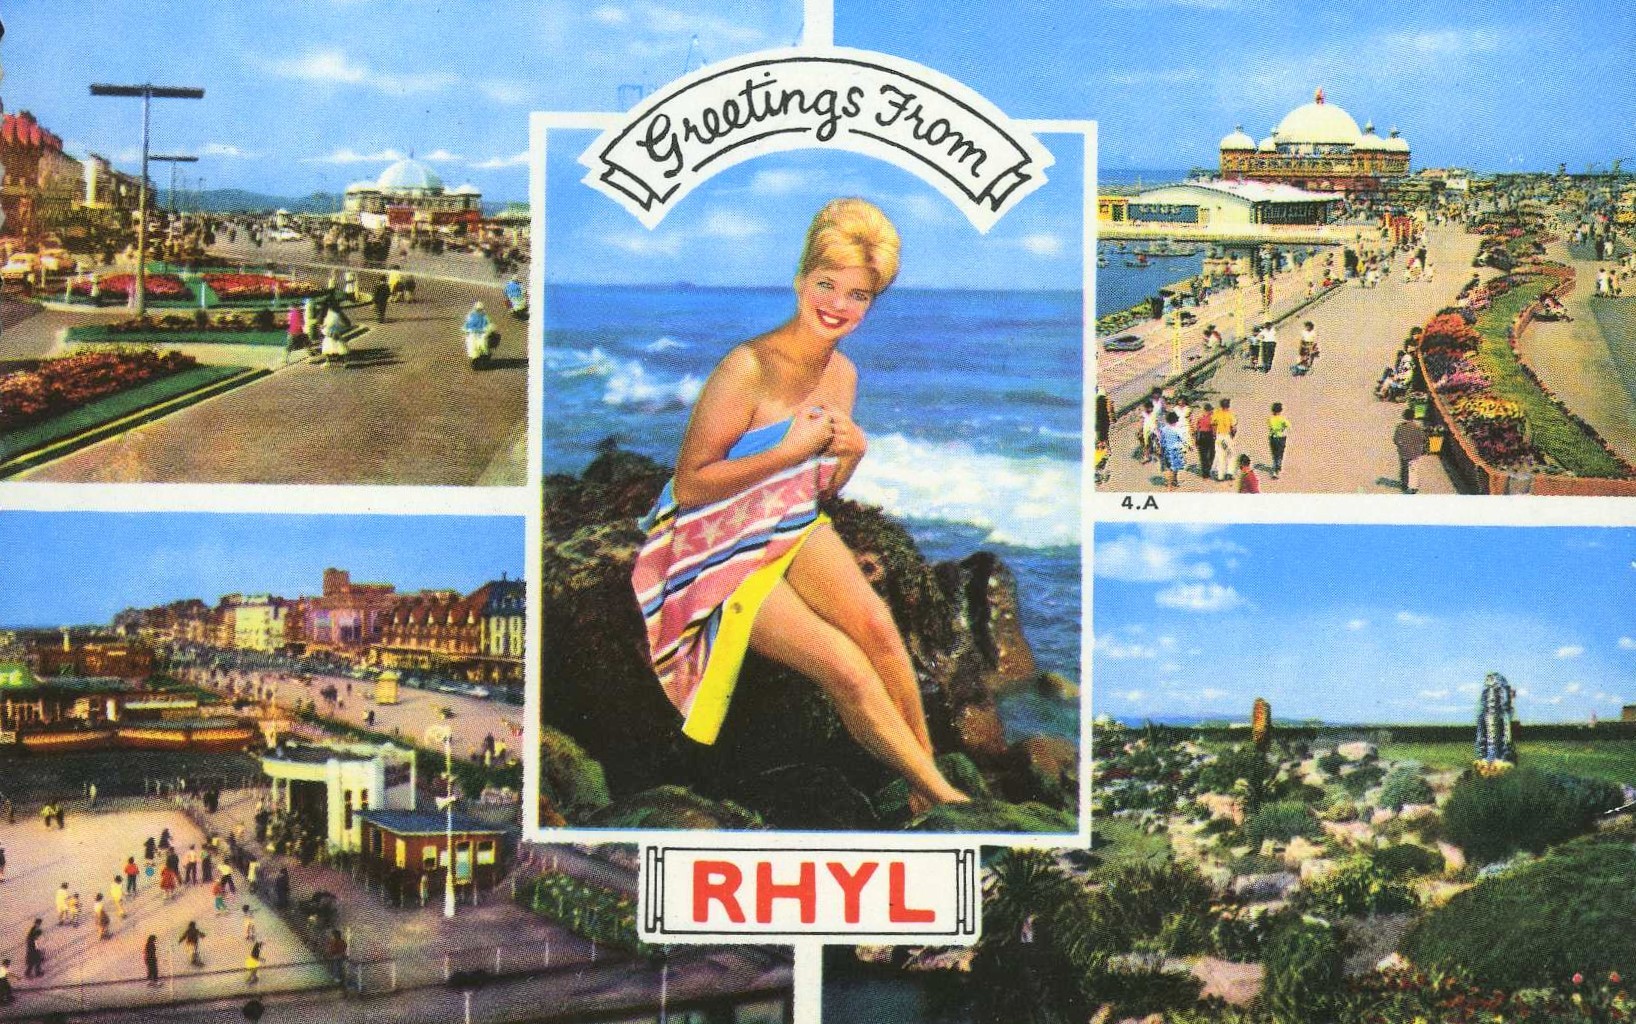 Postcard from Rhyl, date stamped 1963. Courtesy of the Elvet Pierce collection